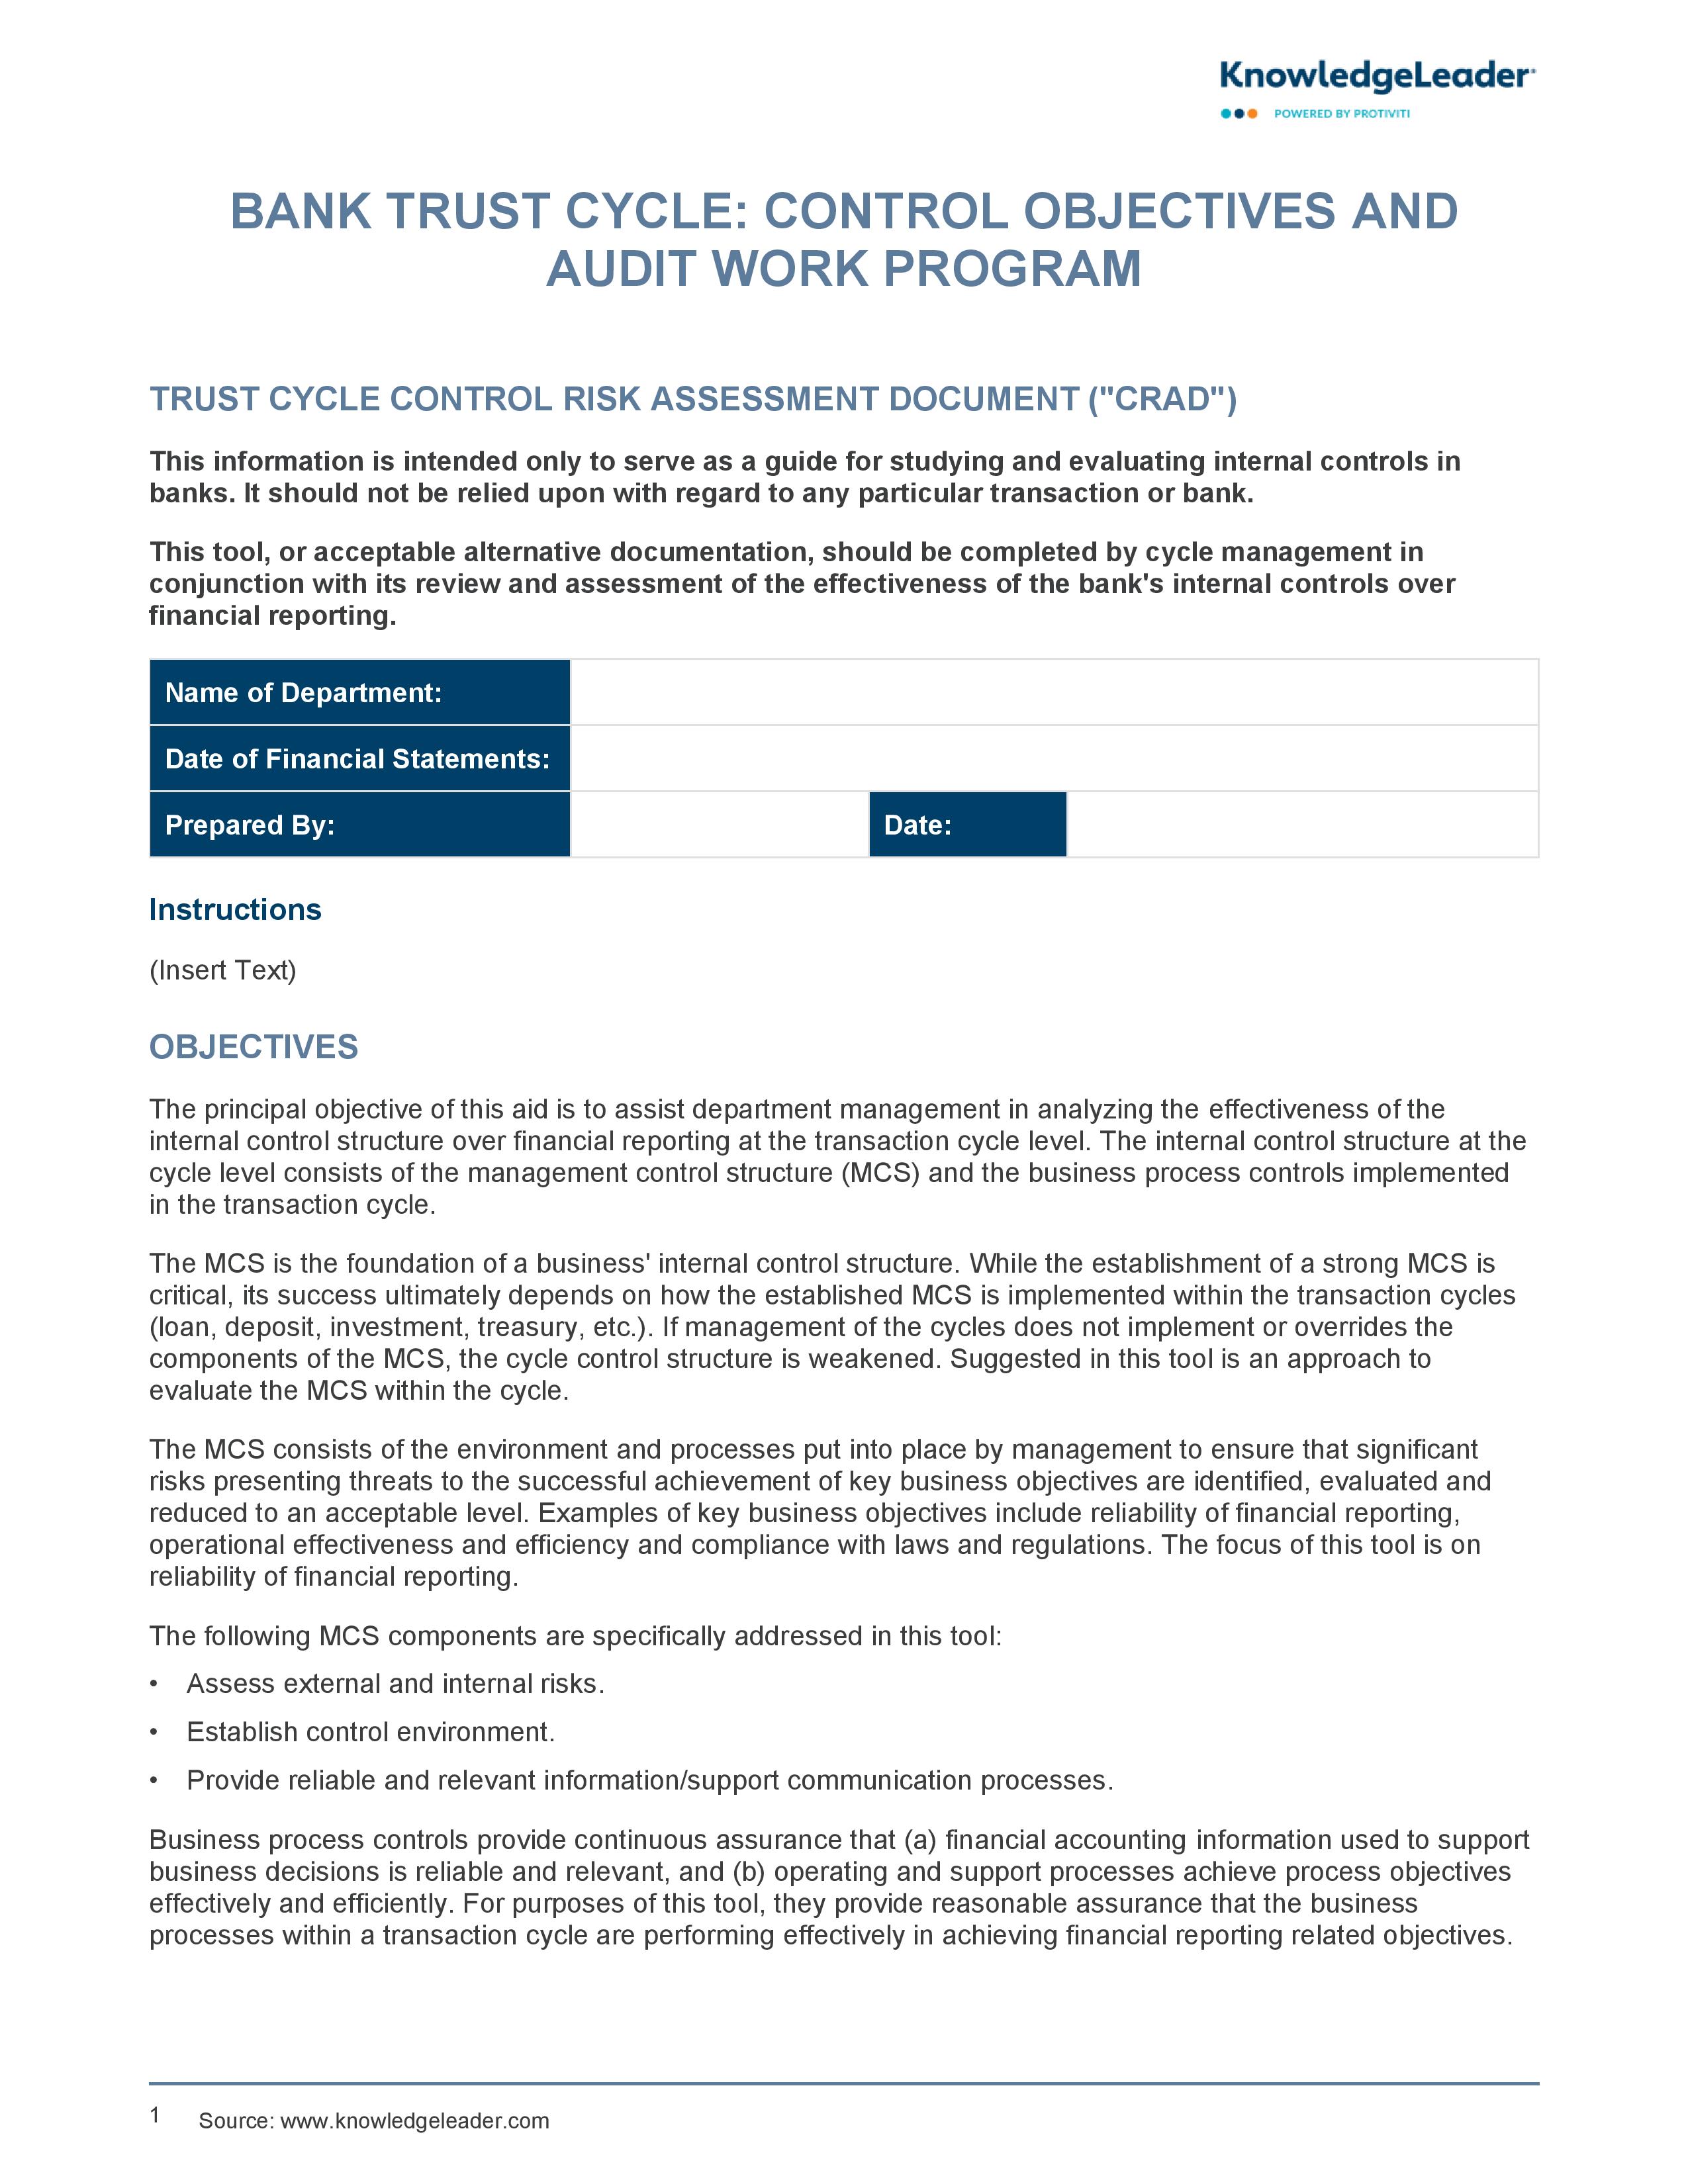 screenshot of the first page of the Bank Trust Cycle - Control Objectives and Audit Work Program